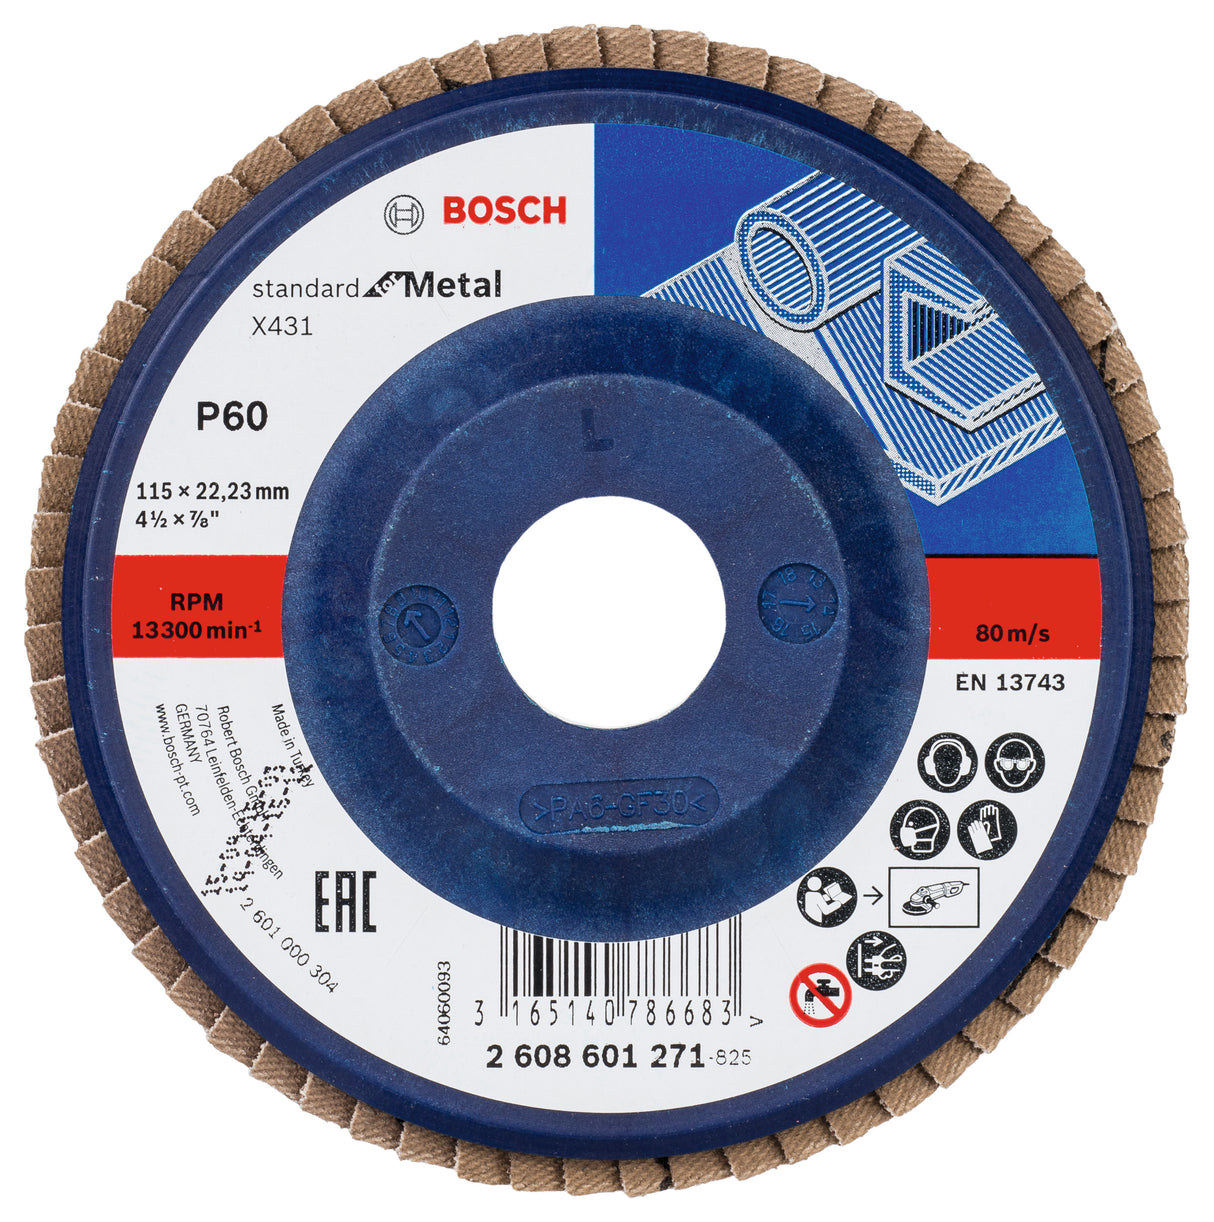 Bosch Professional X431 Flap Disc for Metal - 115mm, G60, 22.23mm